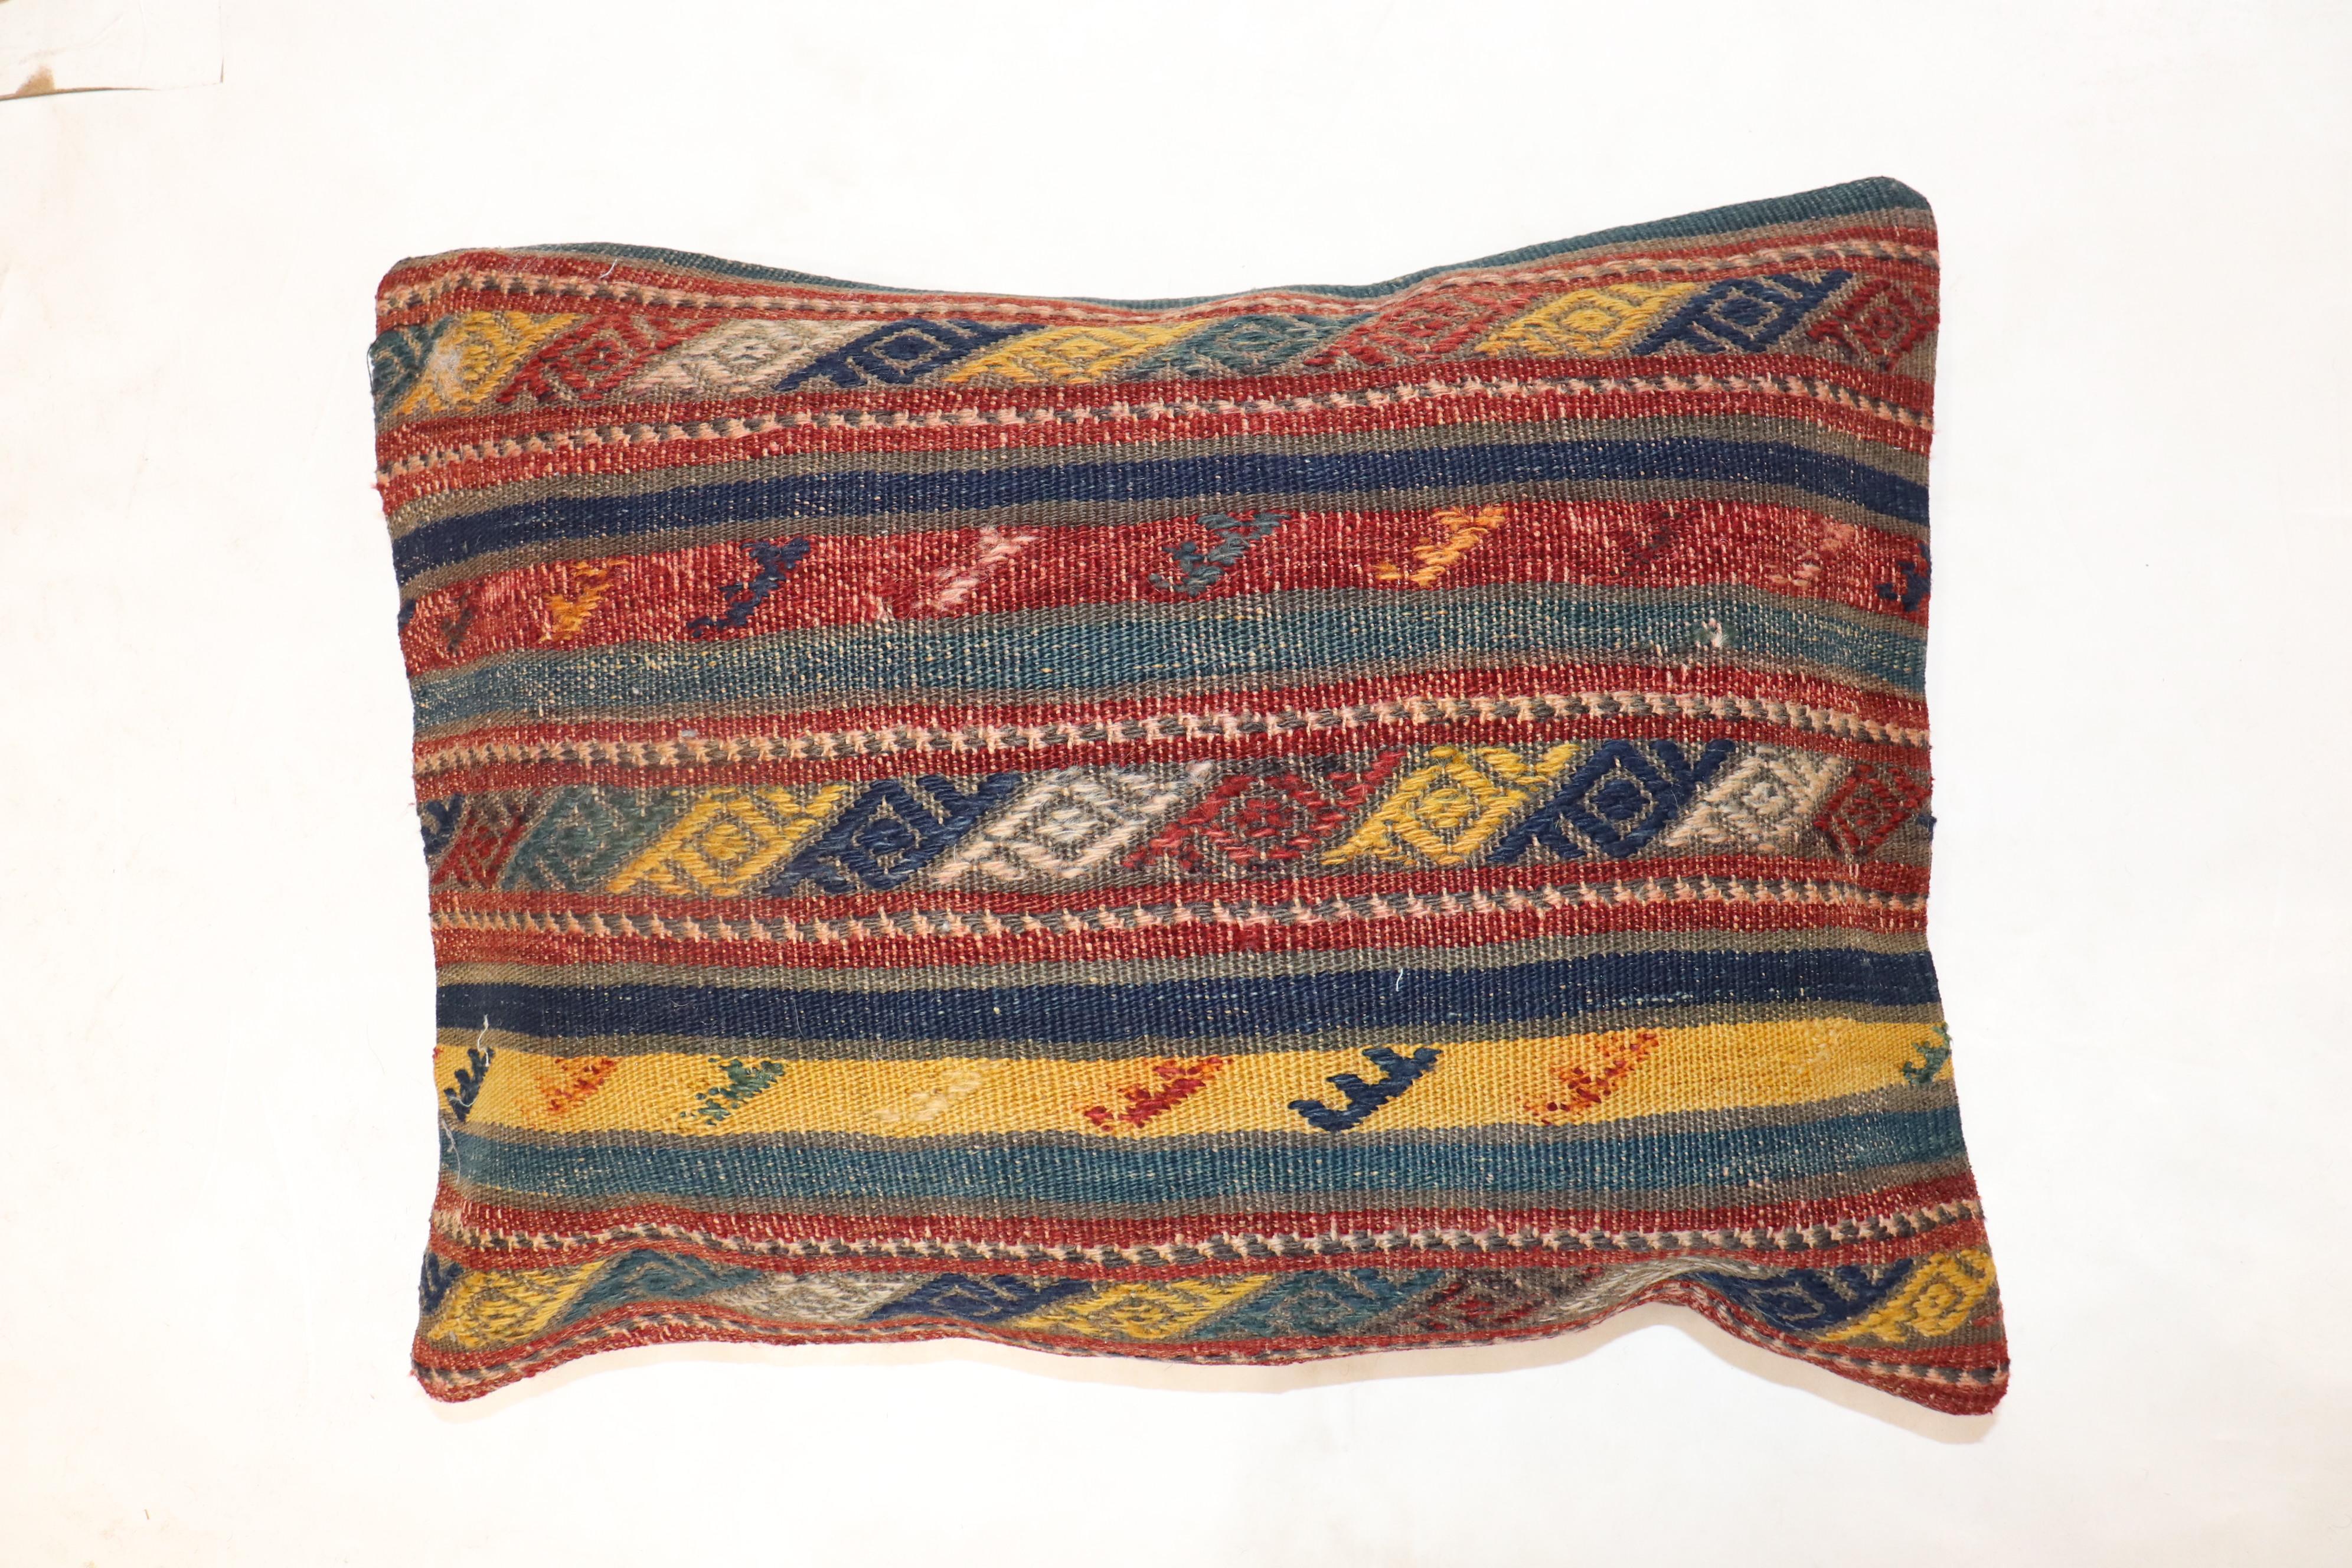 Pillow made from a vintage Turkish Kilim with cotton back. Zipper closure and foam insert provided. 

Measures: 16'' x 21''.